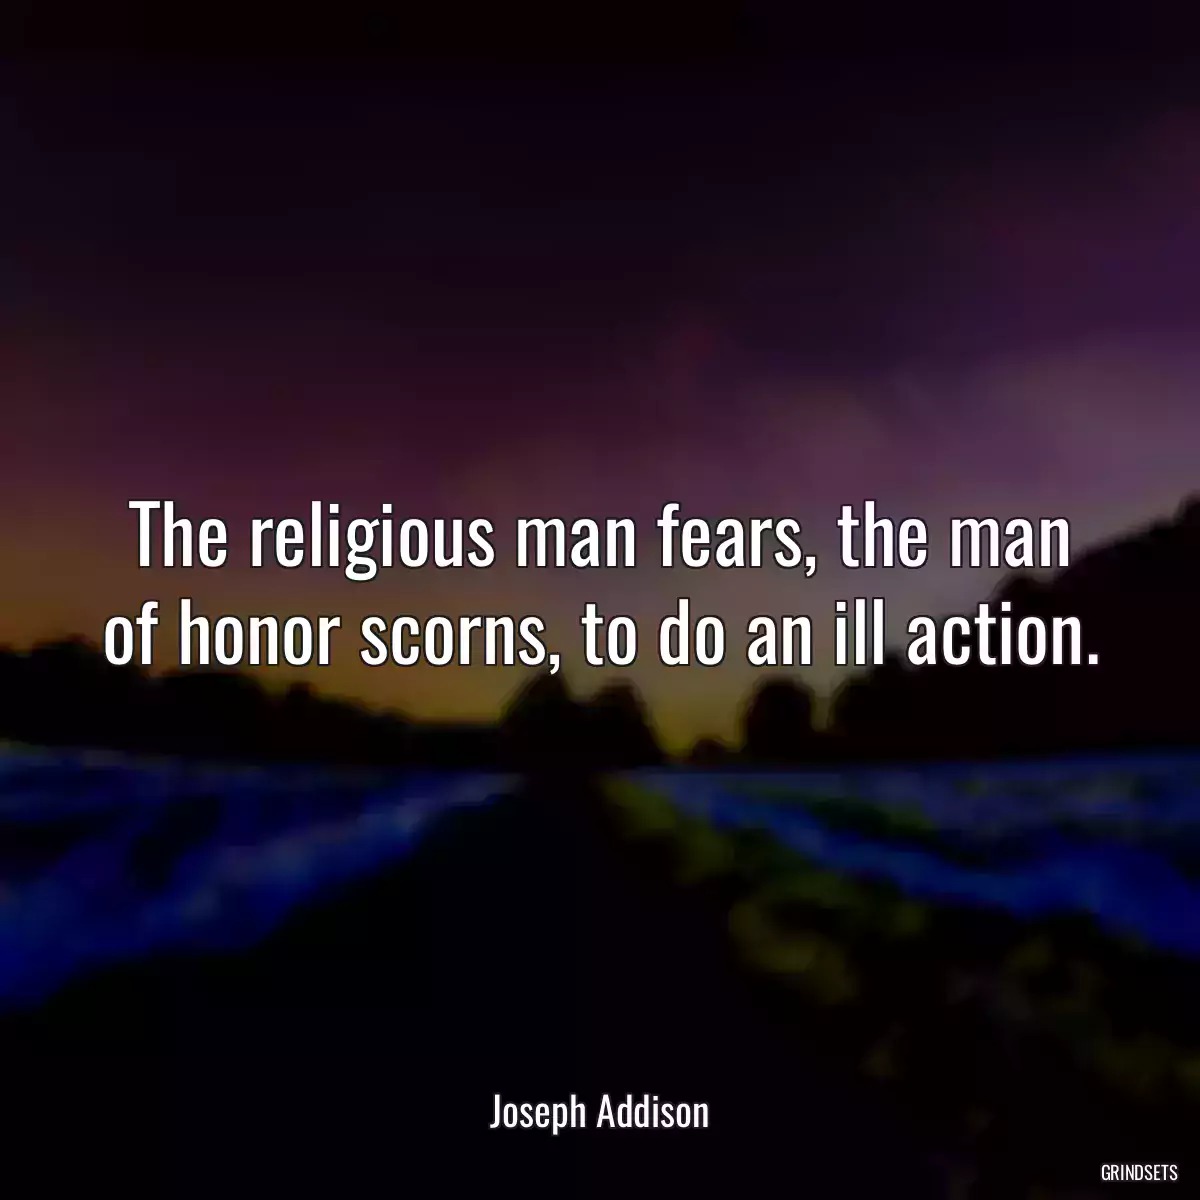 The religious man fears, the man of honor scorns, to do an ill action.